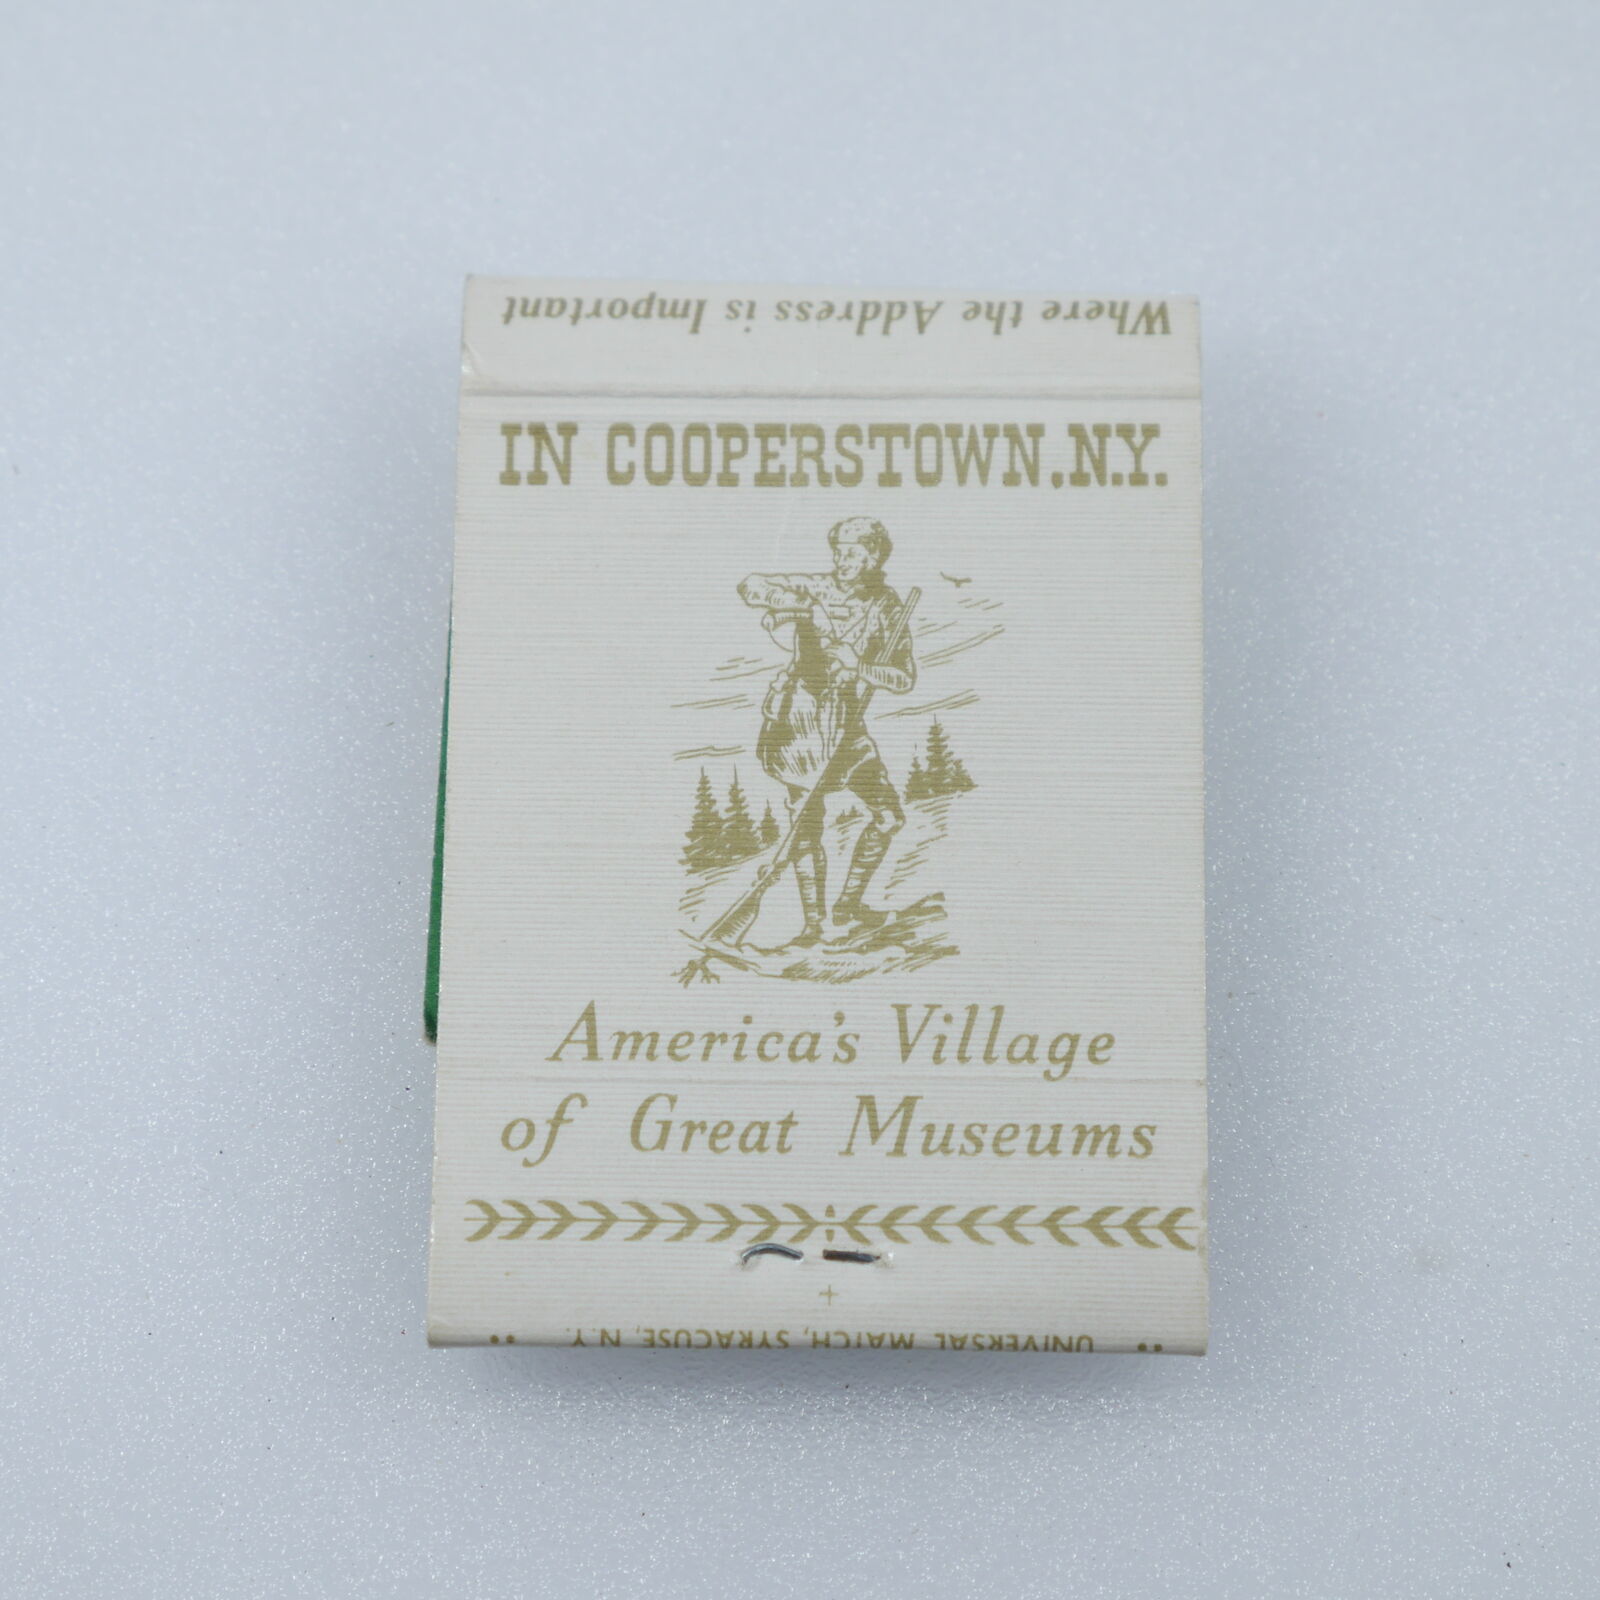 The Otesaga Matchbook Cover Vintage Cooperstown NY Struck